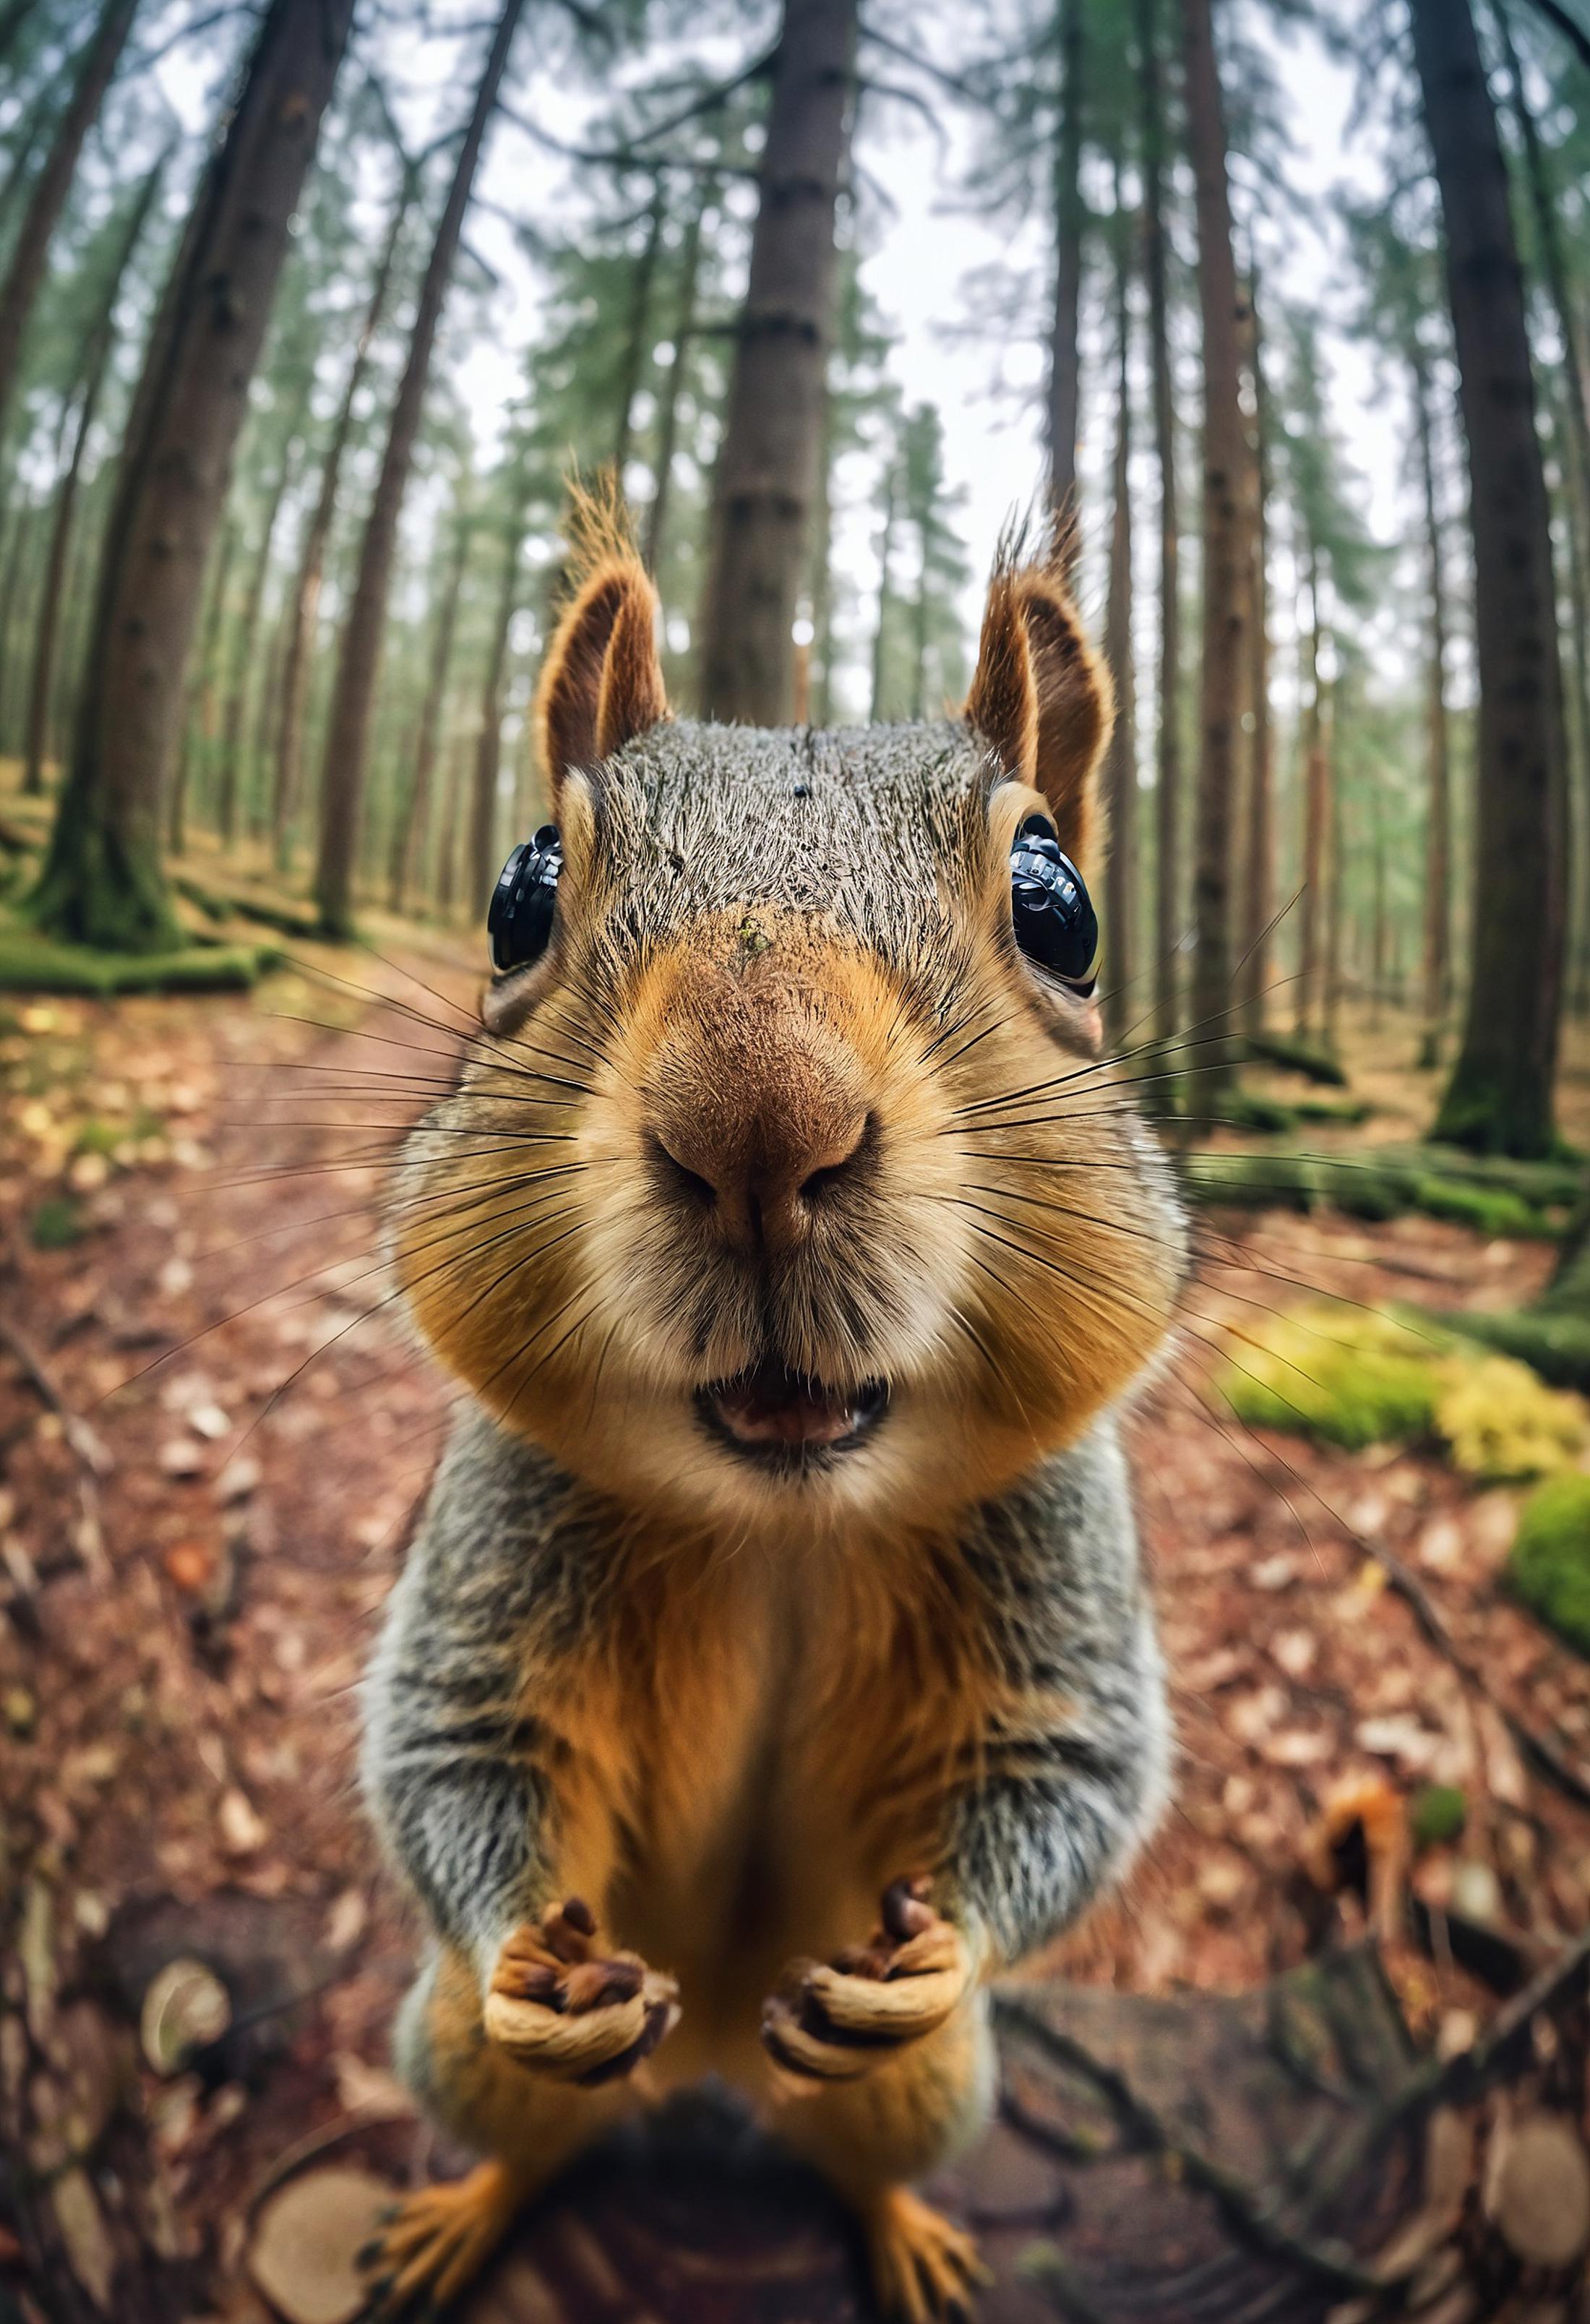 A Squirrel with Big Eyes and a Big Mouth in a Forest